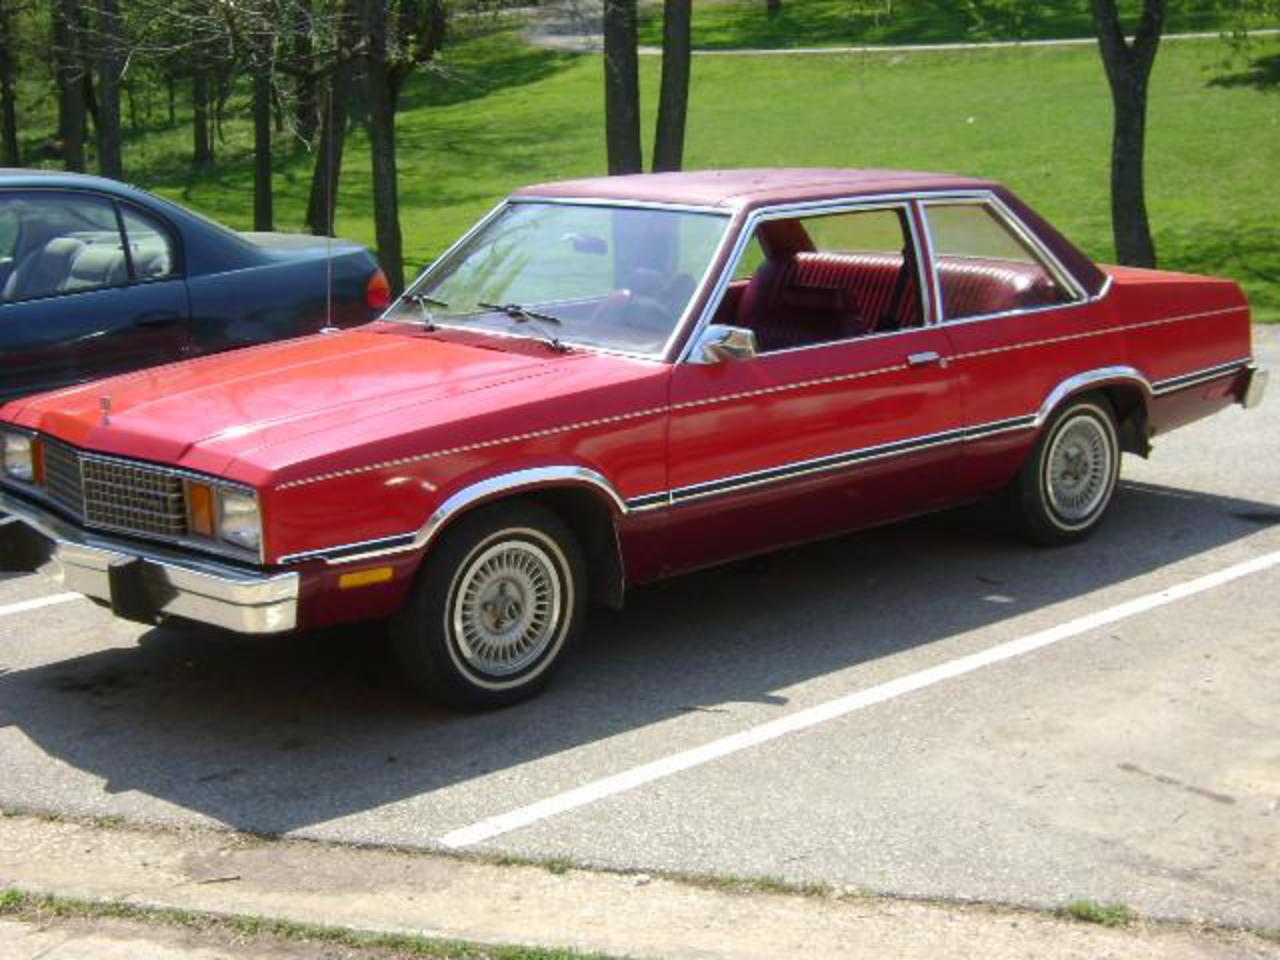 1979 Ford Fairmont ""Lil' Red"" - Bloomington, IN owned by ...